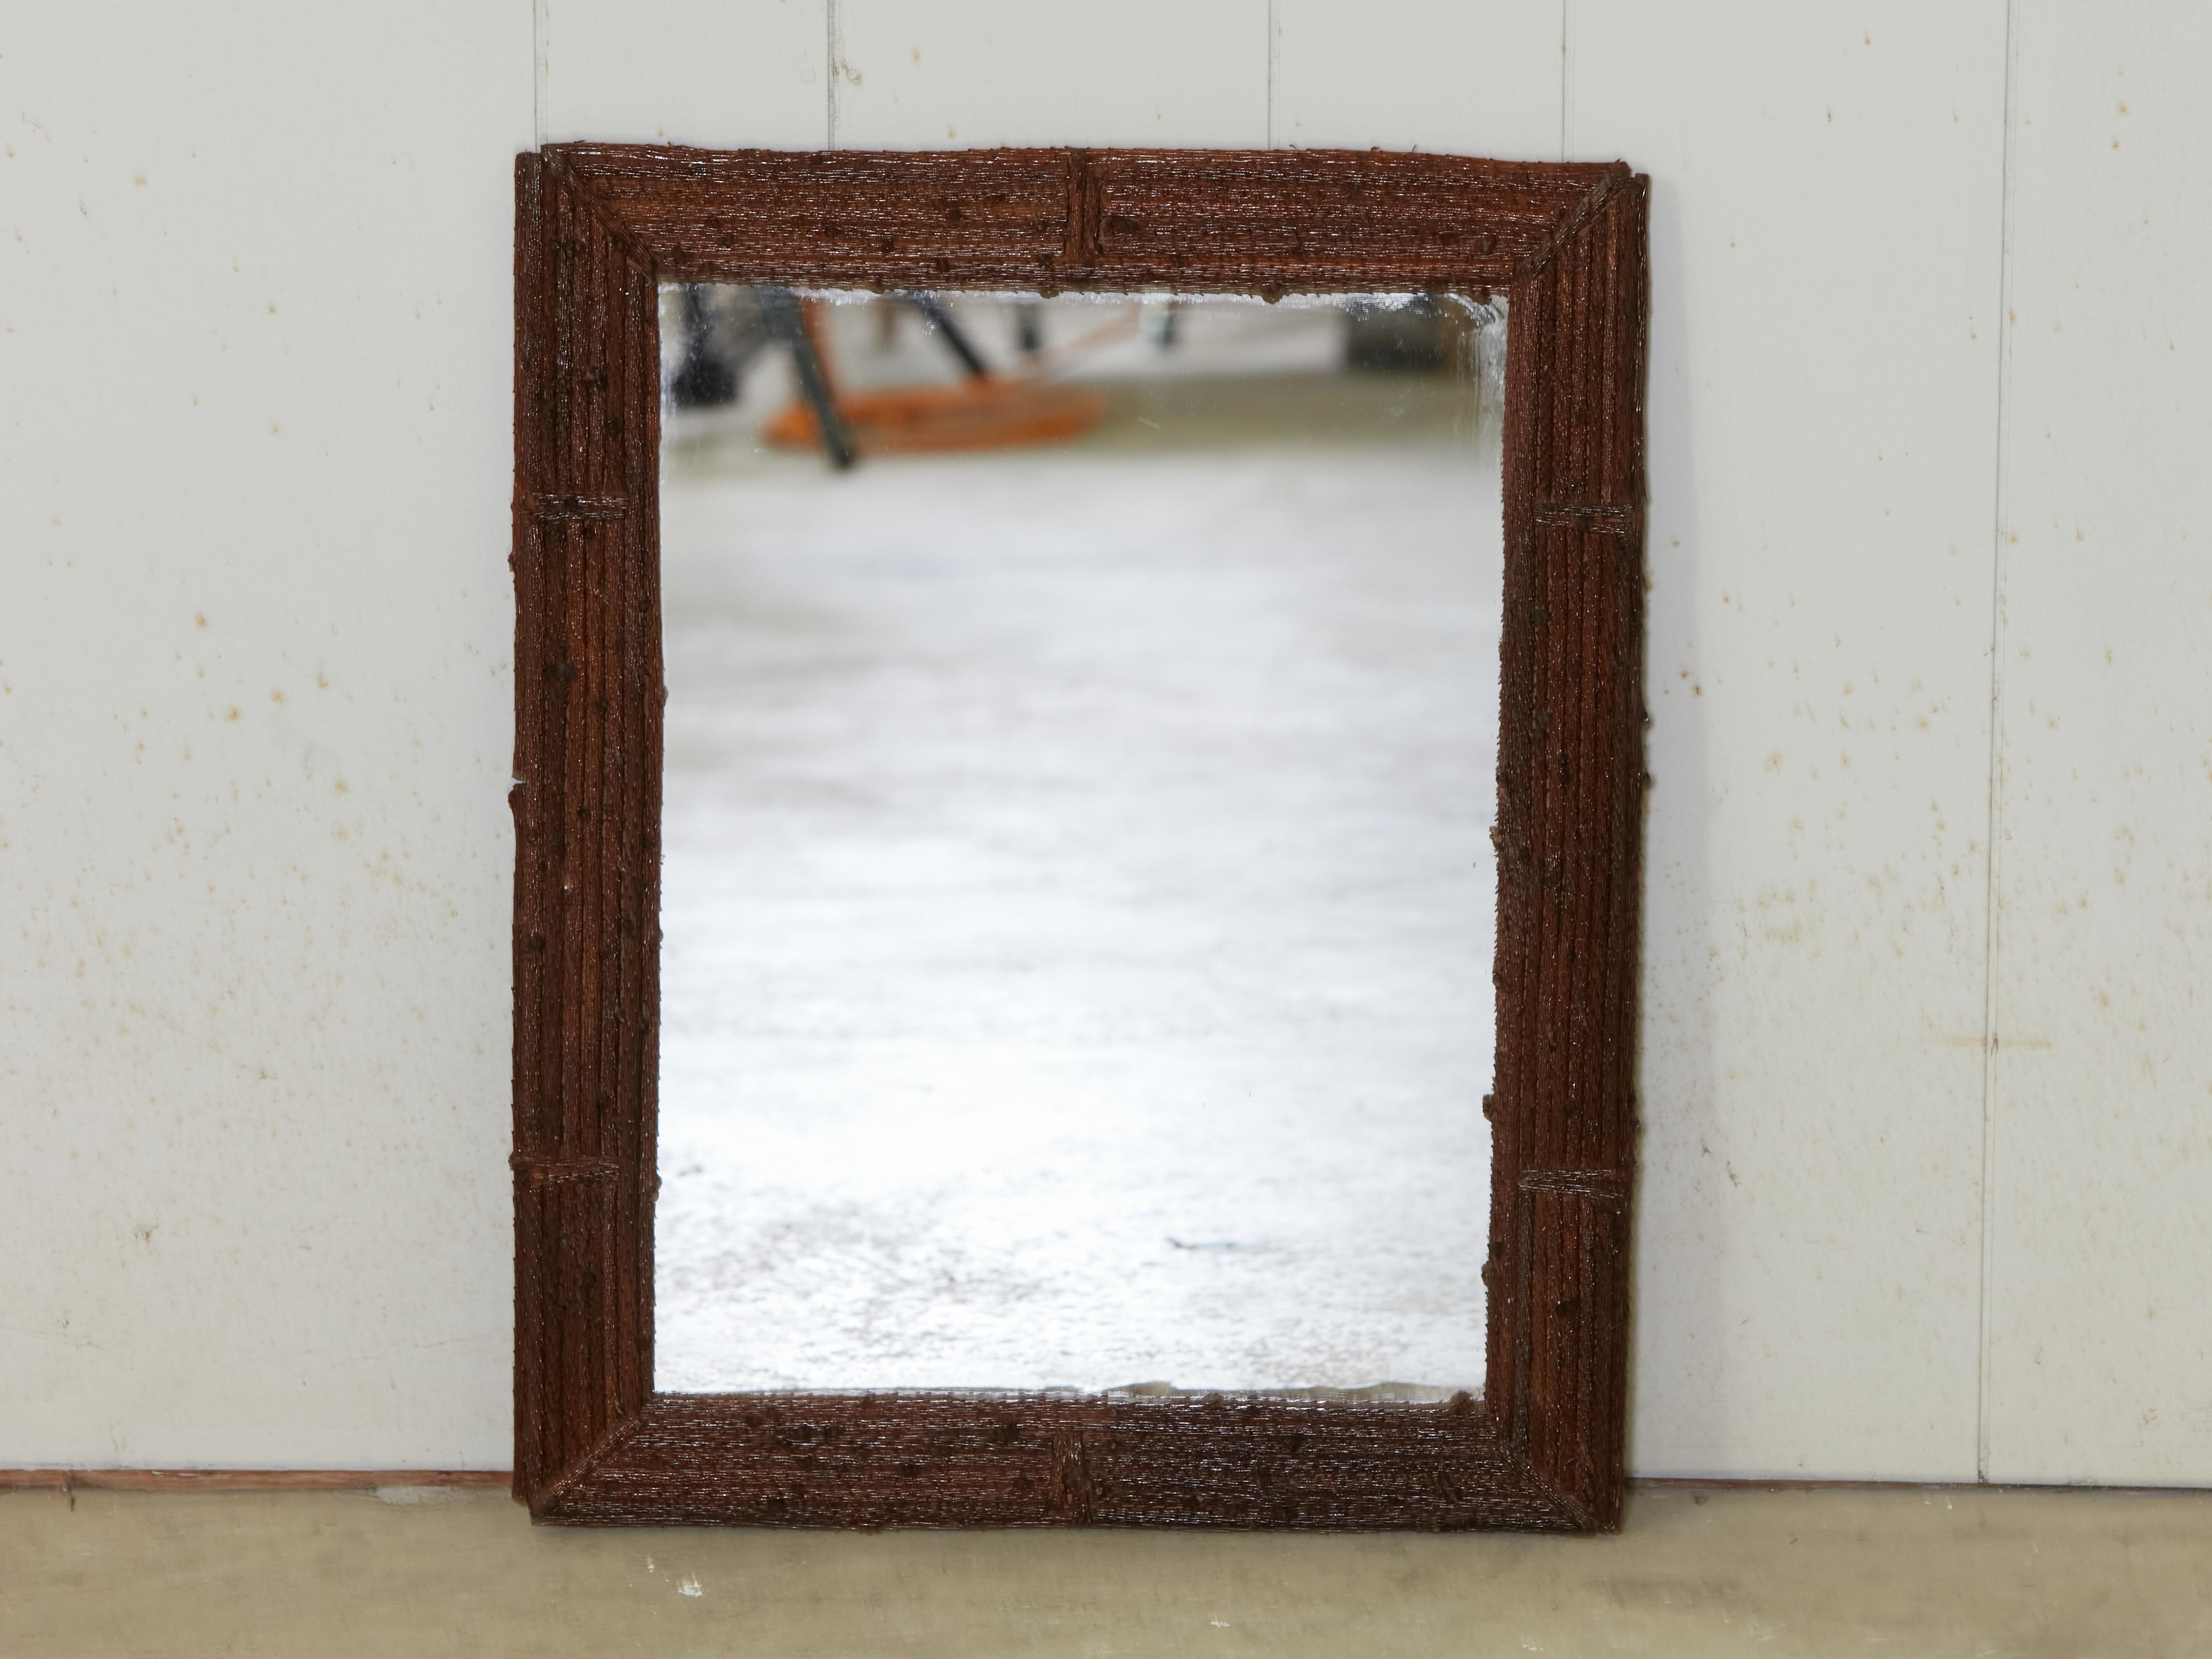 A French wooden Tramp Art twig mirror from the early 20th century, with brown patina and rustic appearance. Created in France during the early years of the 20th century, this Tramp Art mirror charms us with its simple lines, rustic character and